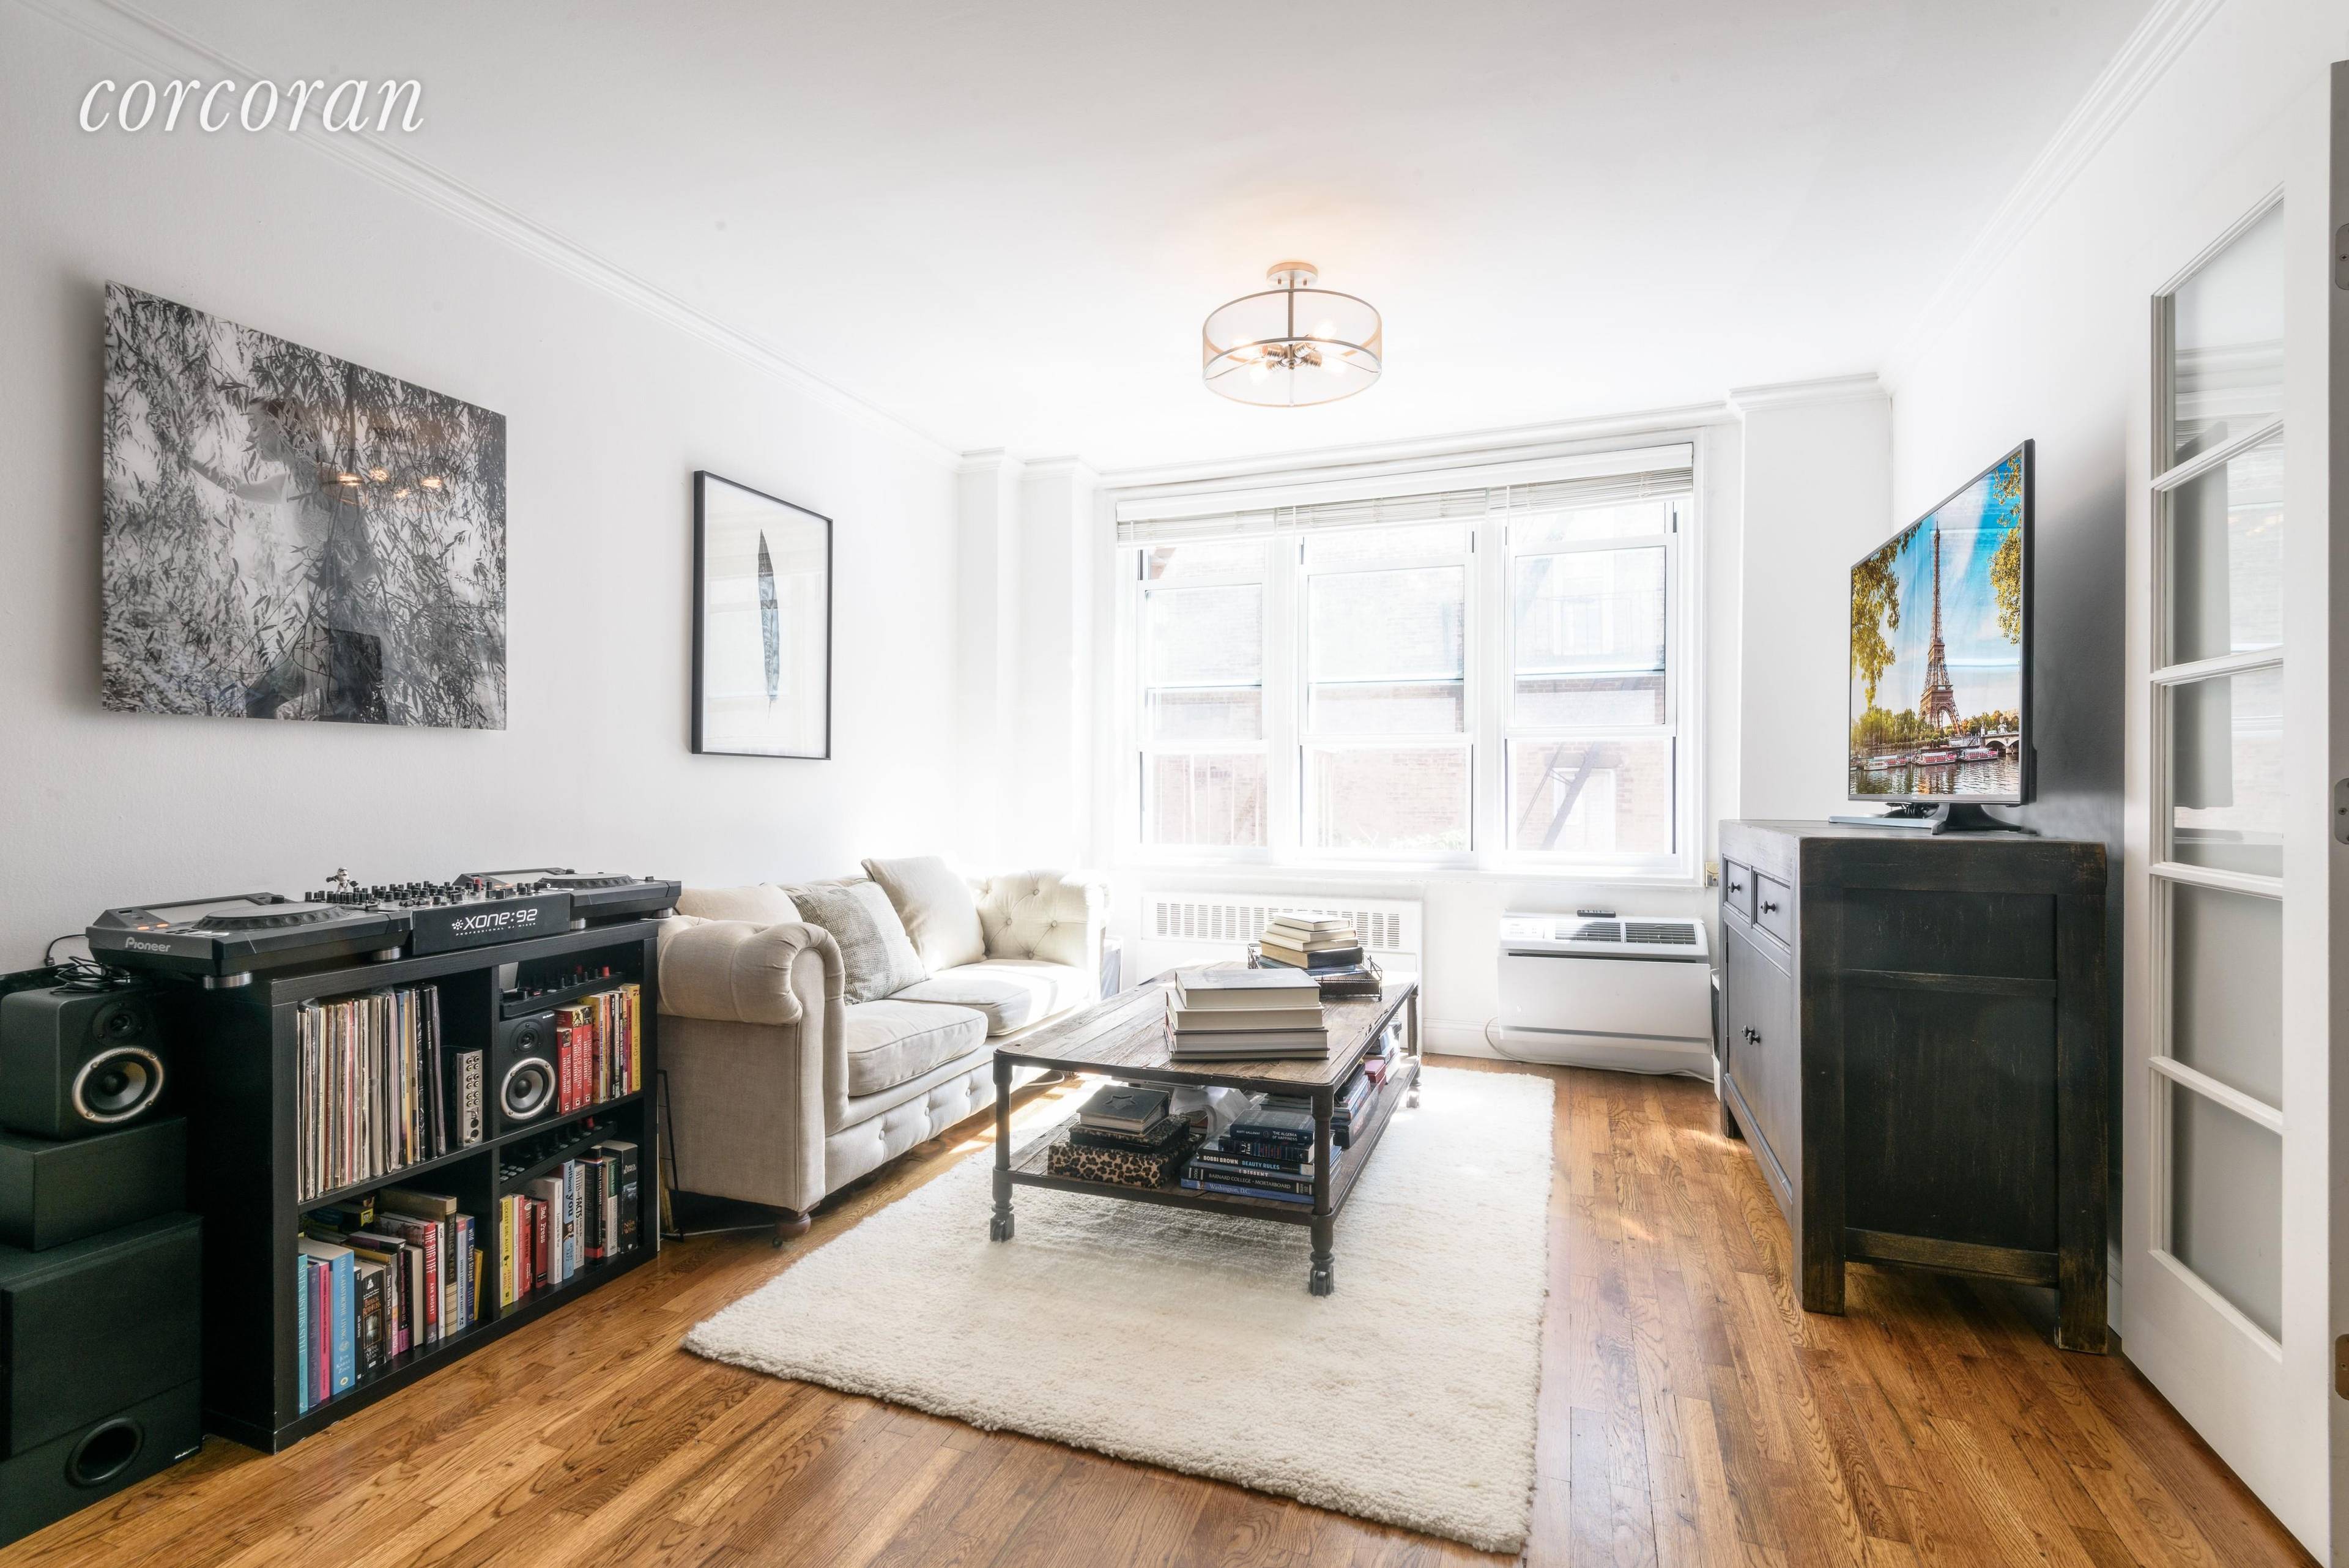 Welcome Home to 54 Orange St, flawlessly located on one of the most coveted tree lined streets in Brooklyn Heights.